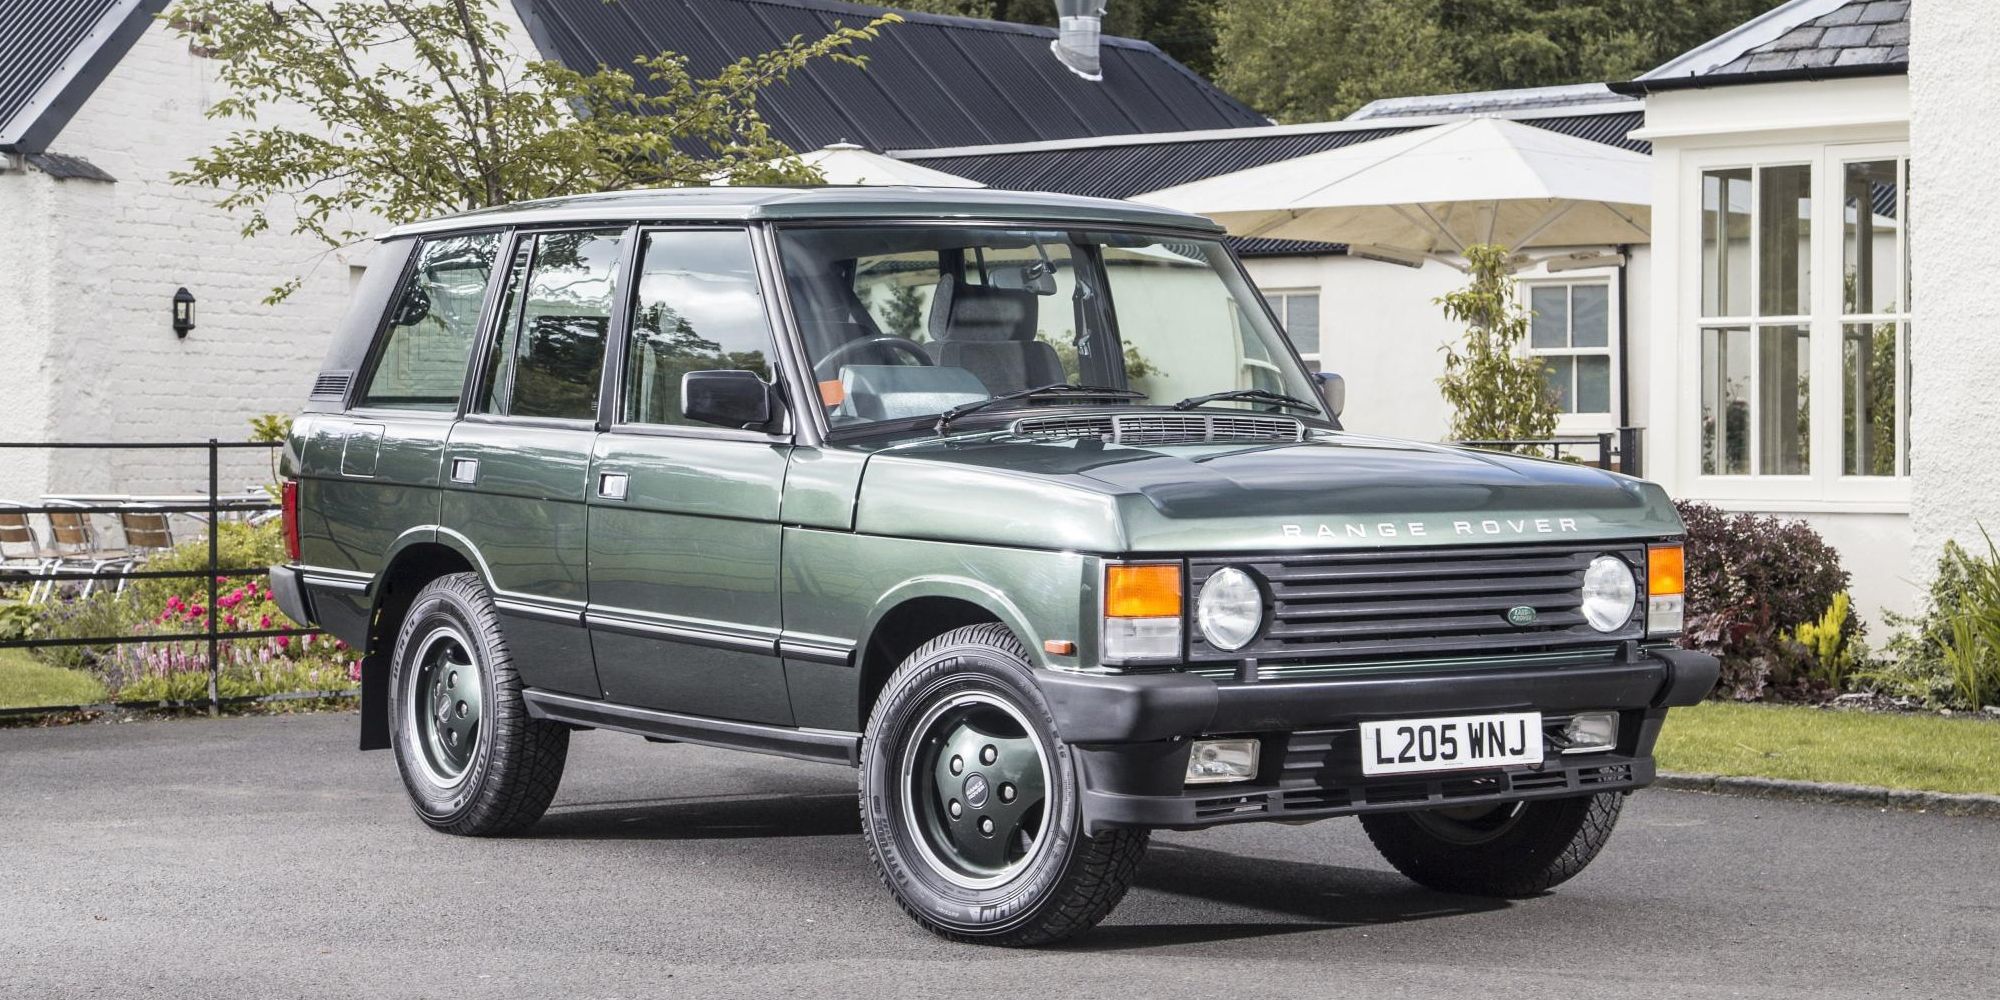 The front of the Range Rover Classic